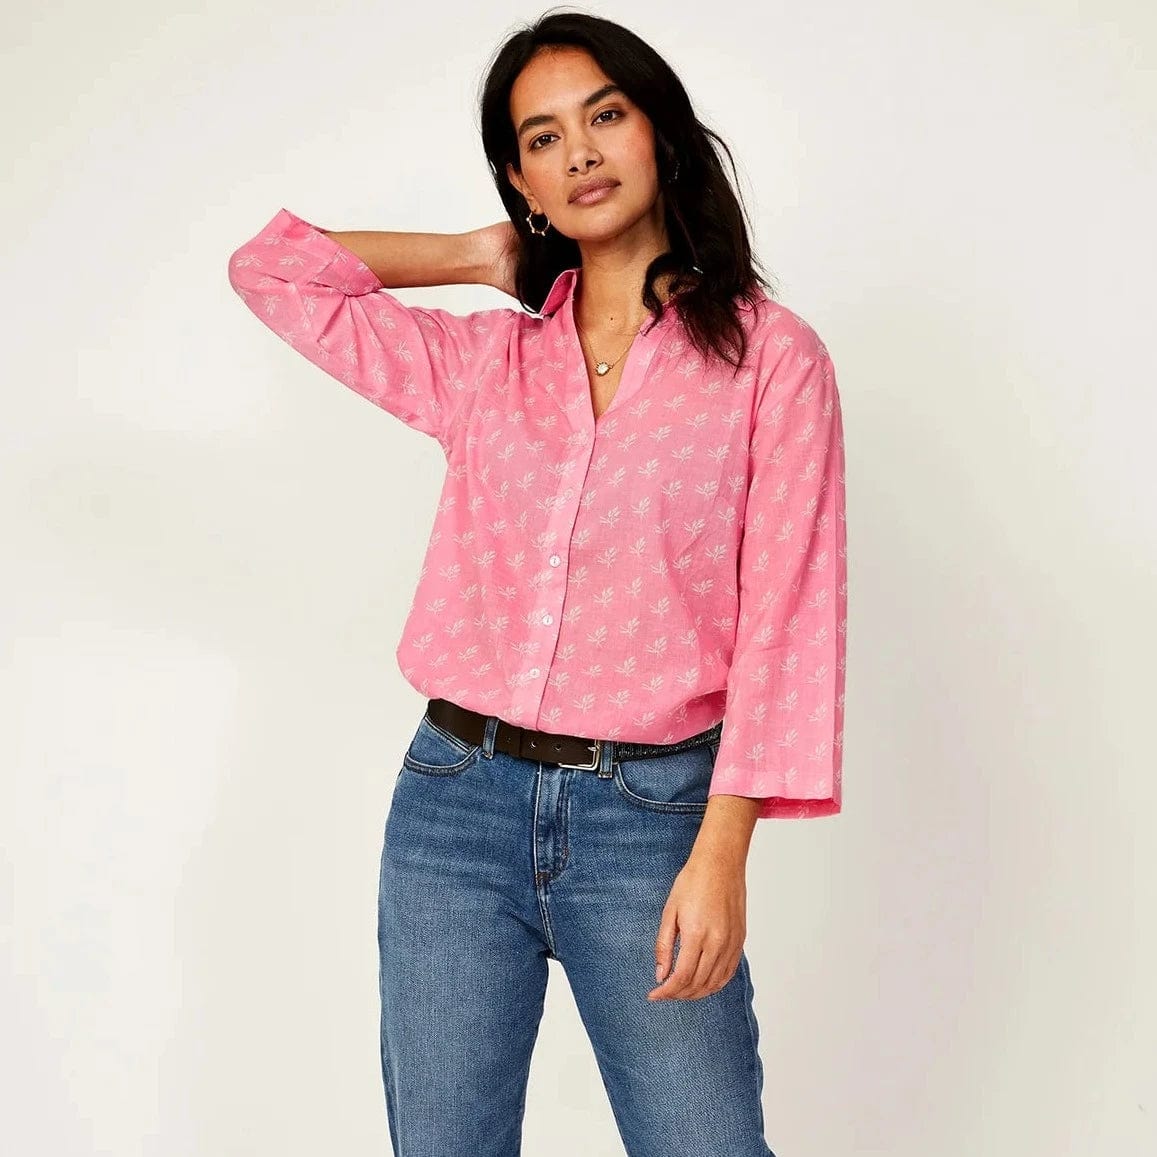 Aspiga Cecilia Shirt in Willow Leaf Pink/White